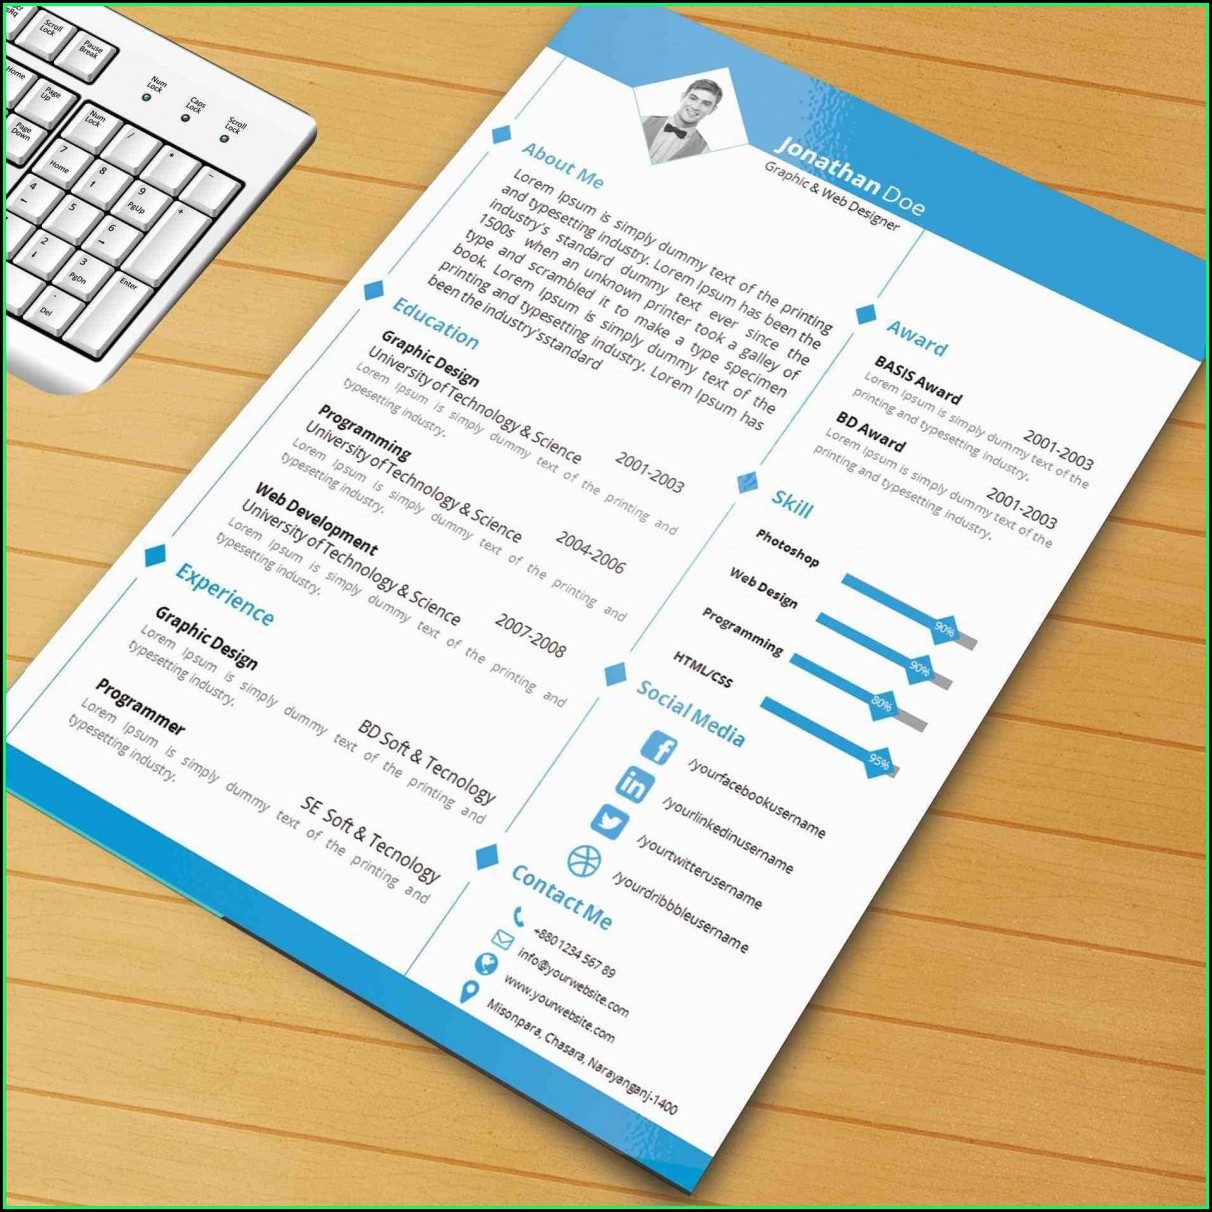 Attractive Resume Template Free Download